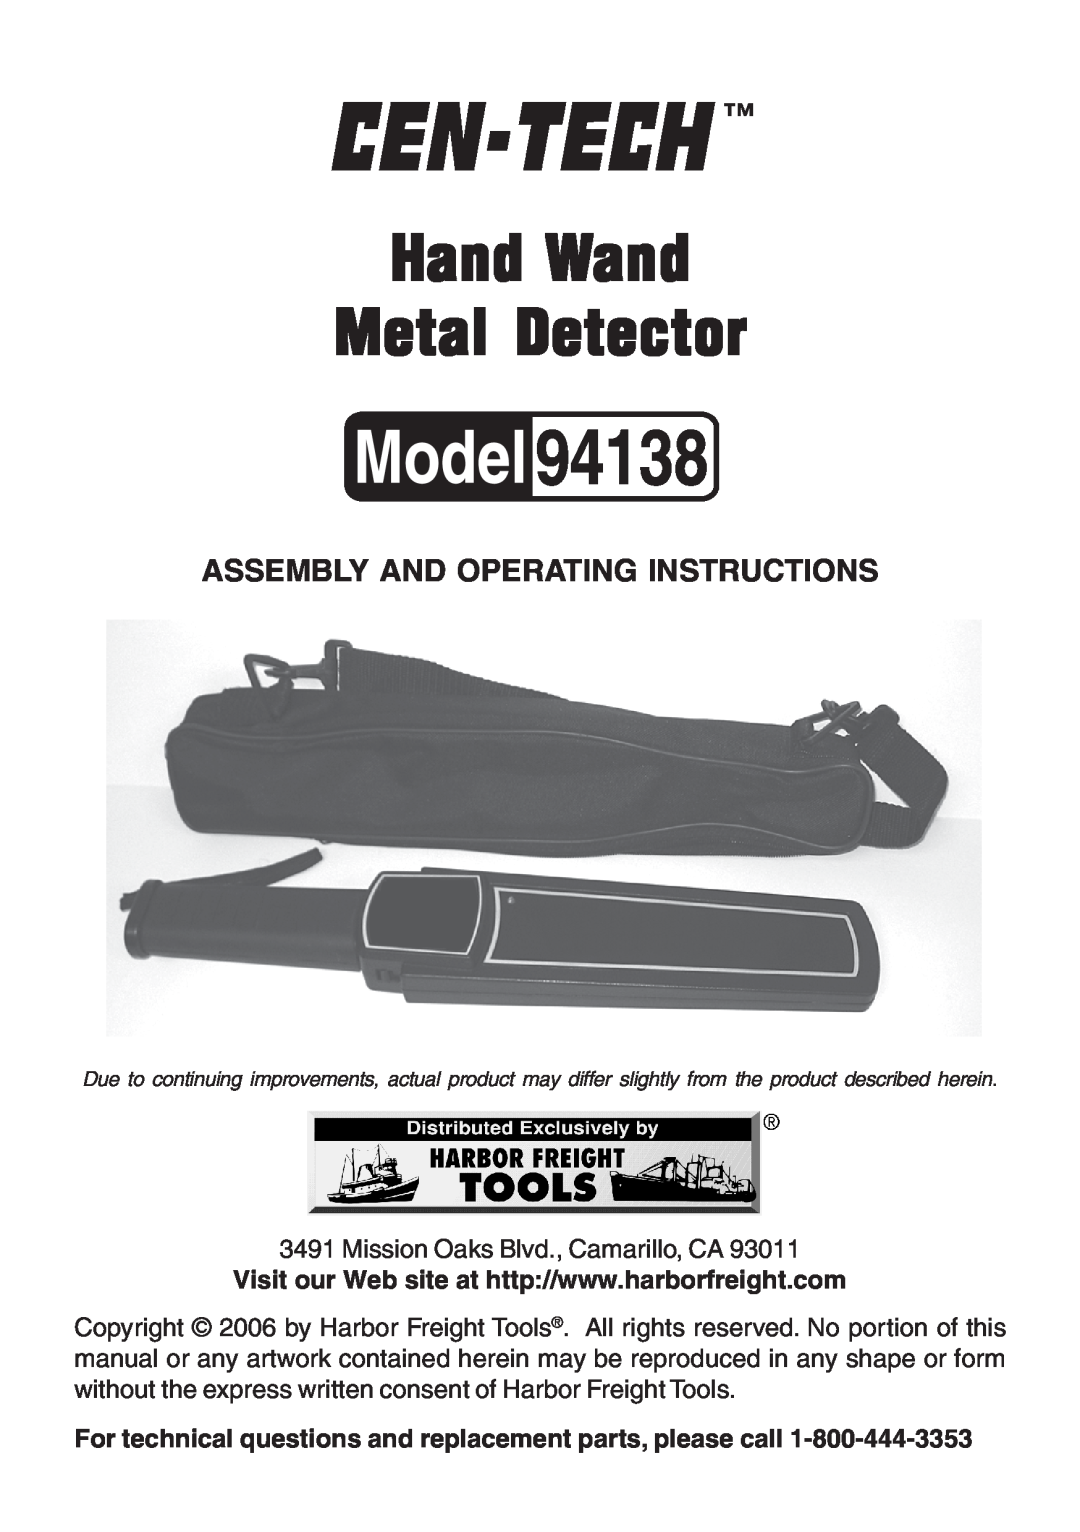 Harbor Freight Tools 94138 manual Assembly And Operating Instructions, Hand Wand Metal Detector 